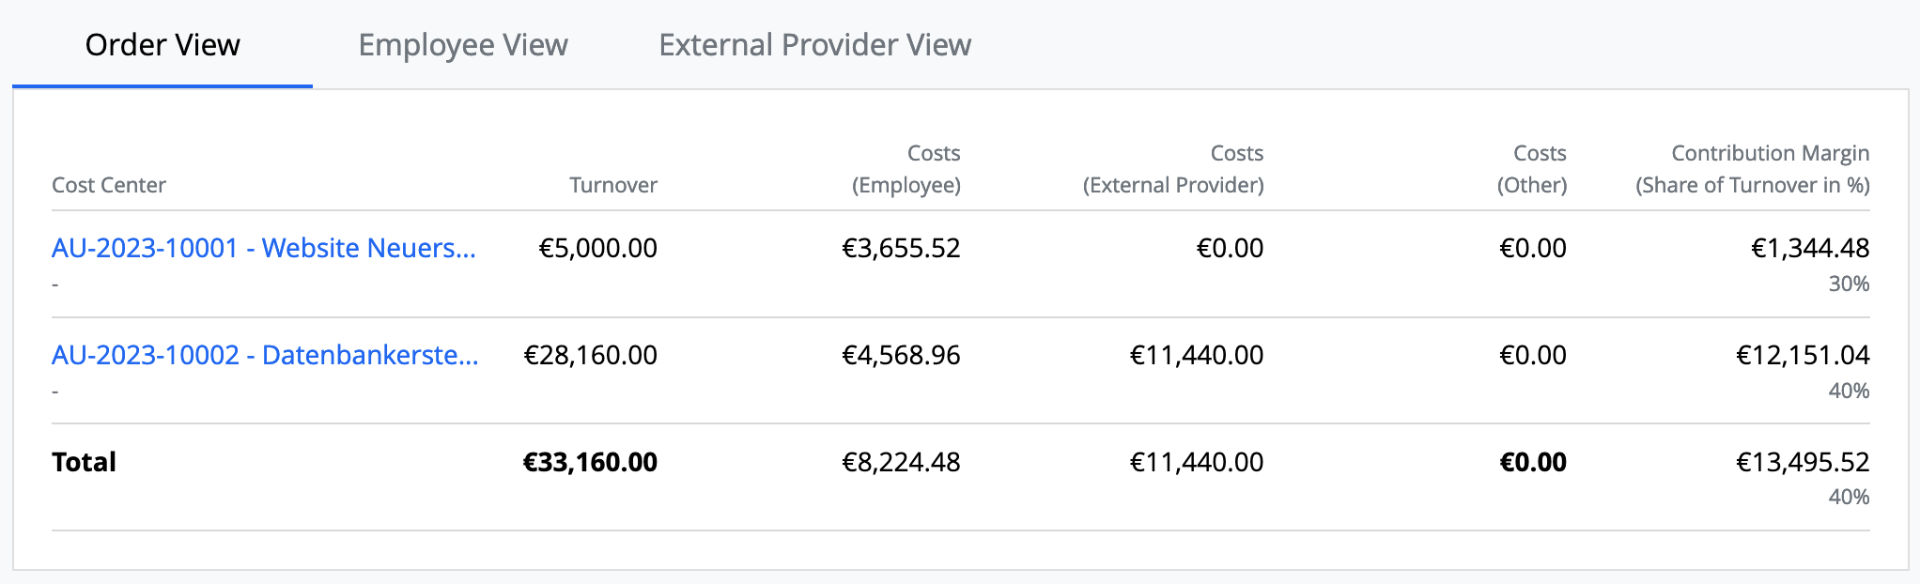 Finance Dashboard - Business Unit - Order View